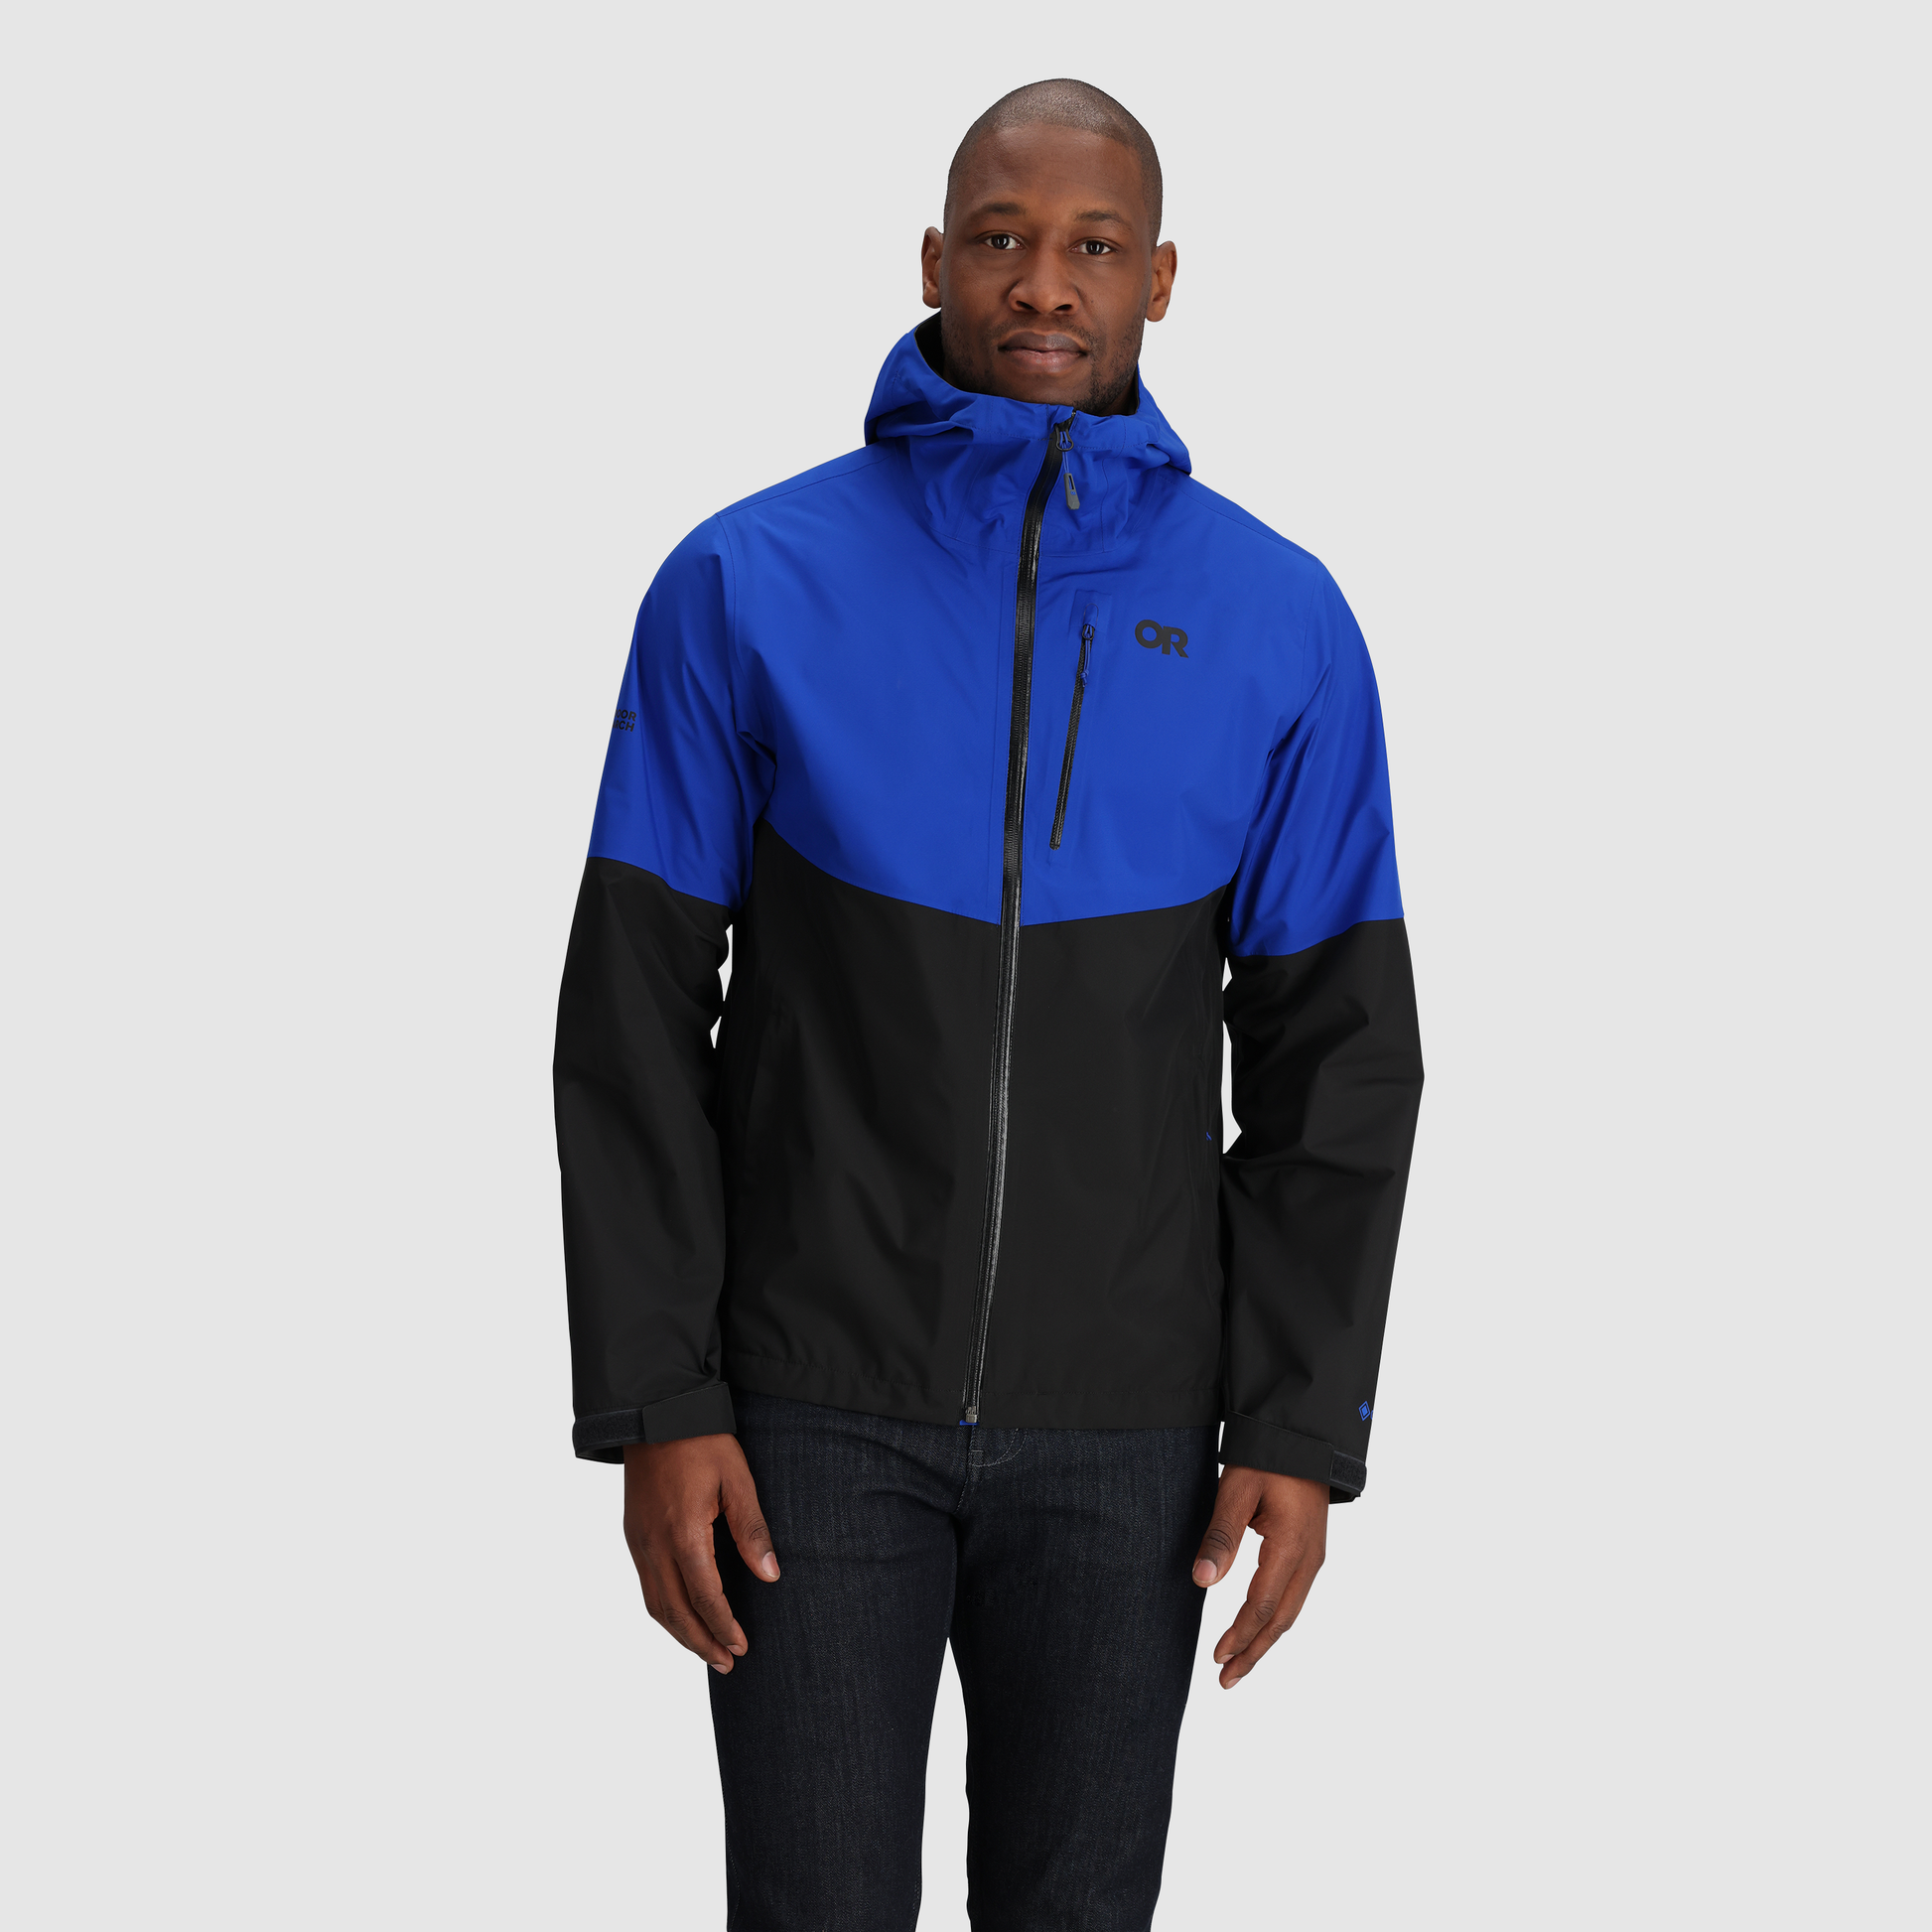 The North Face Alpine Project GORE-TEX Jacket (Men's)